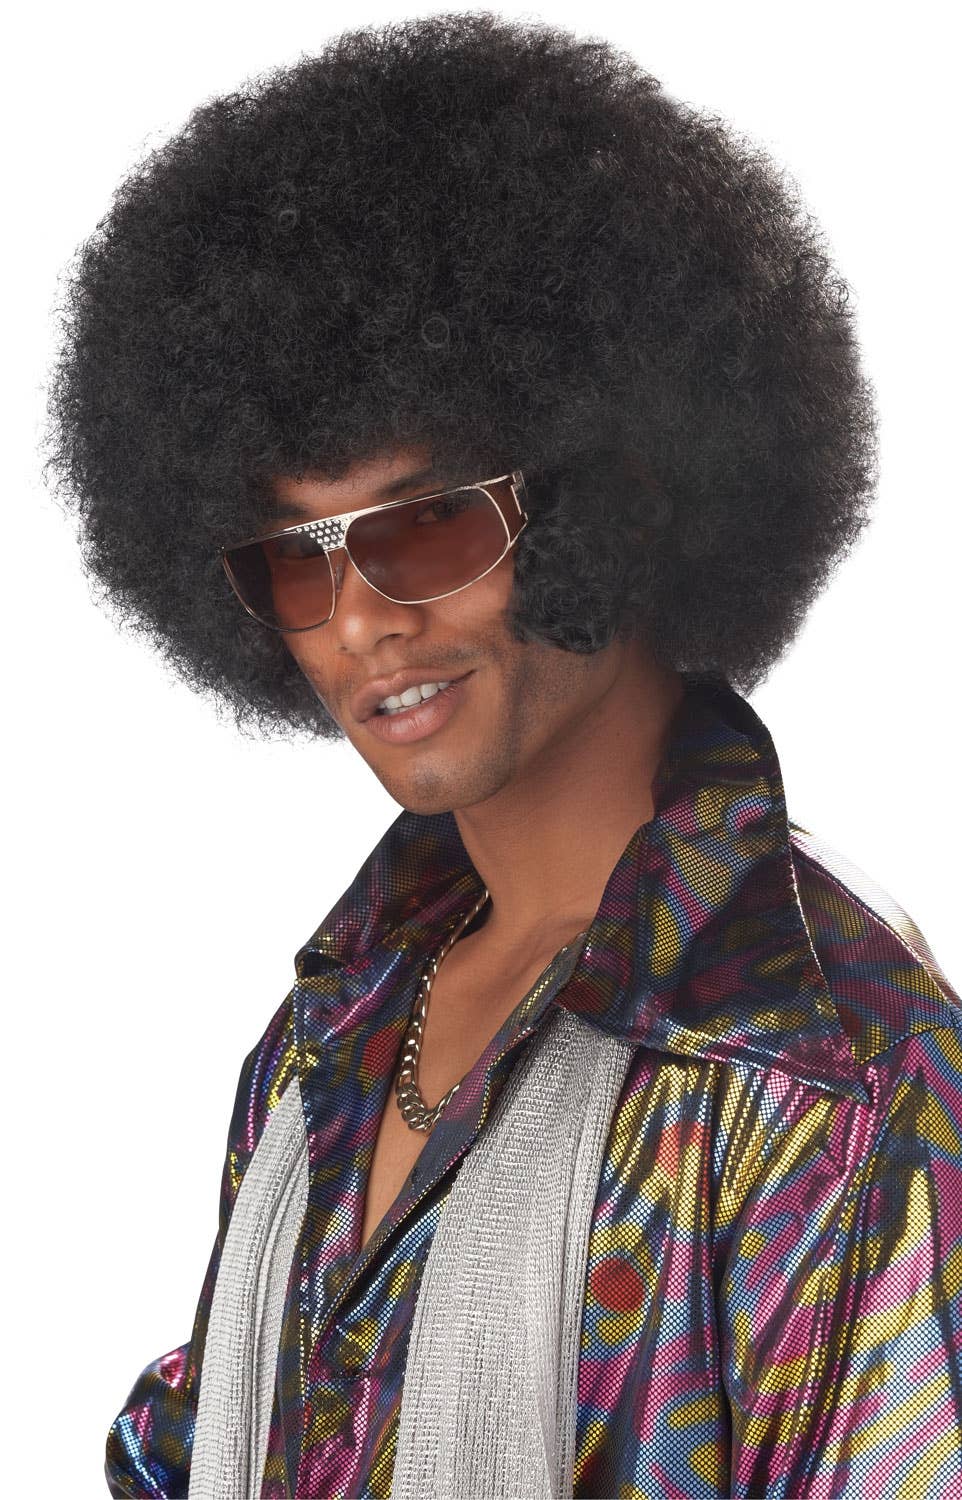 70s Disco Men's Black Frizzy Afro Costume Wig - Main Image